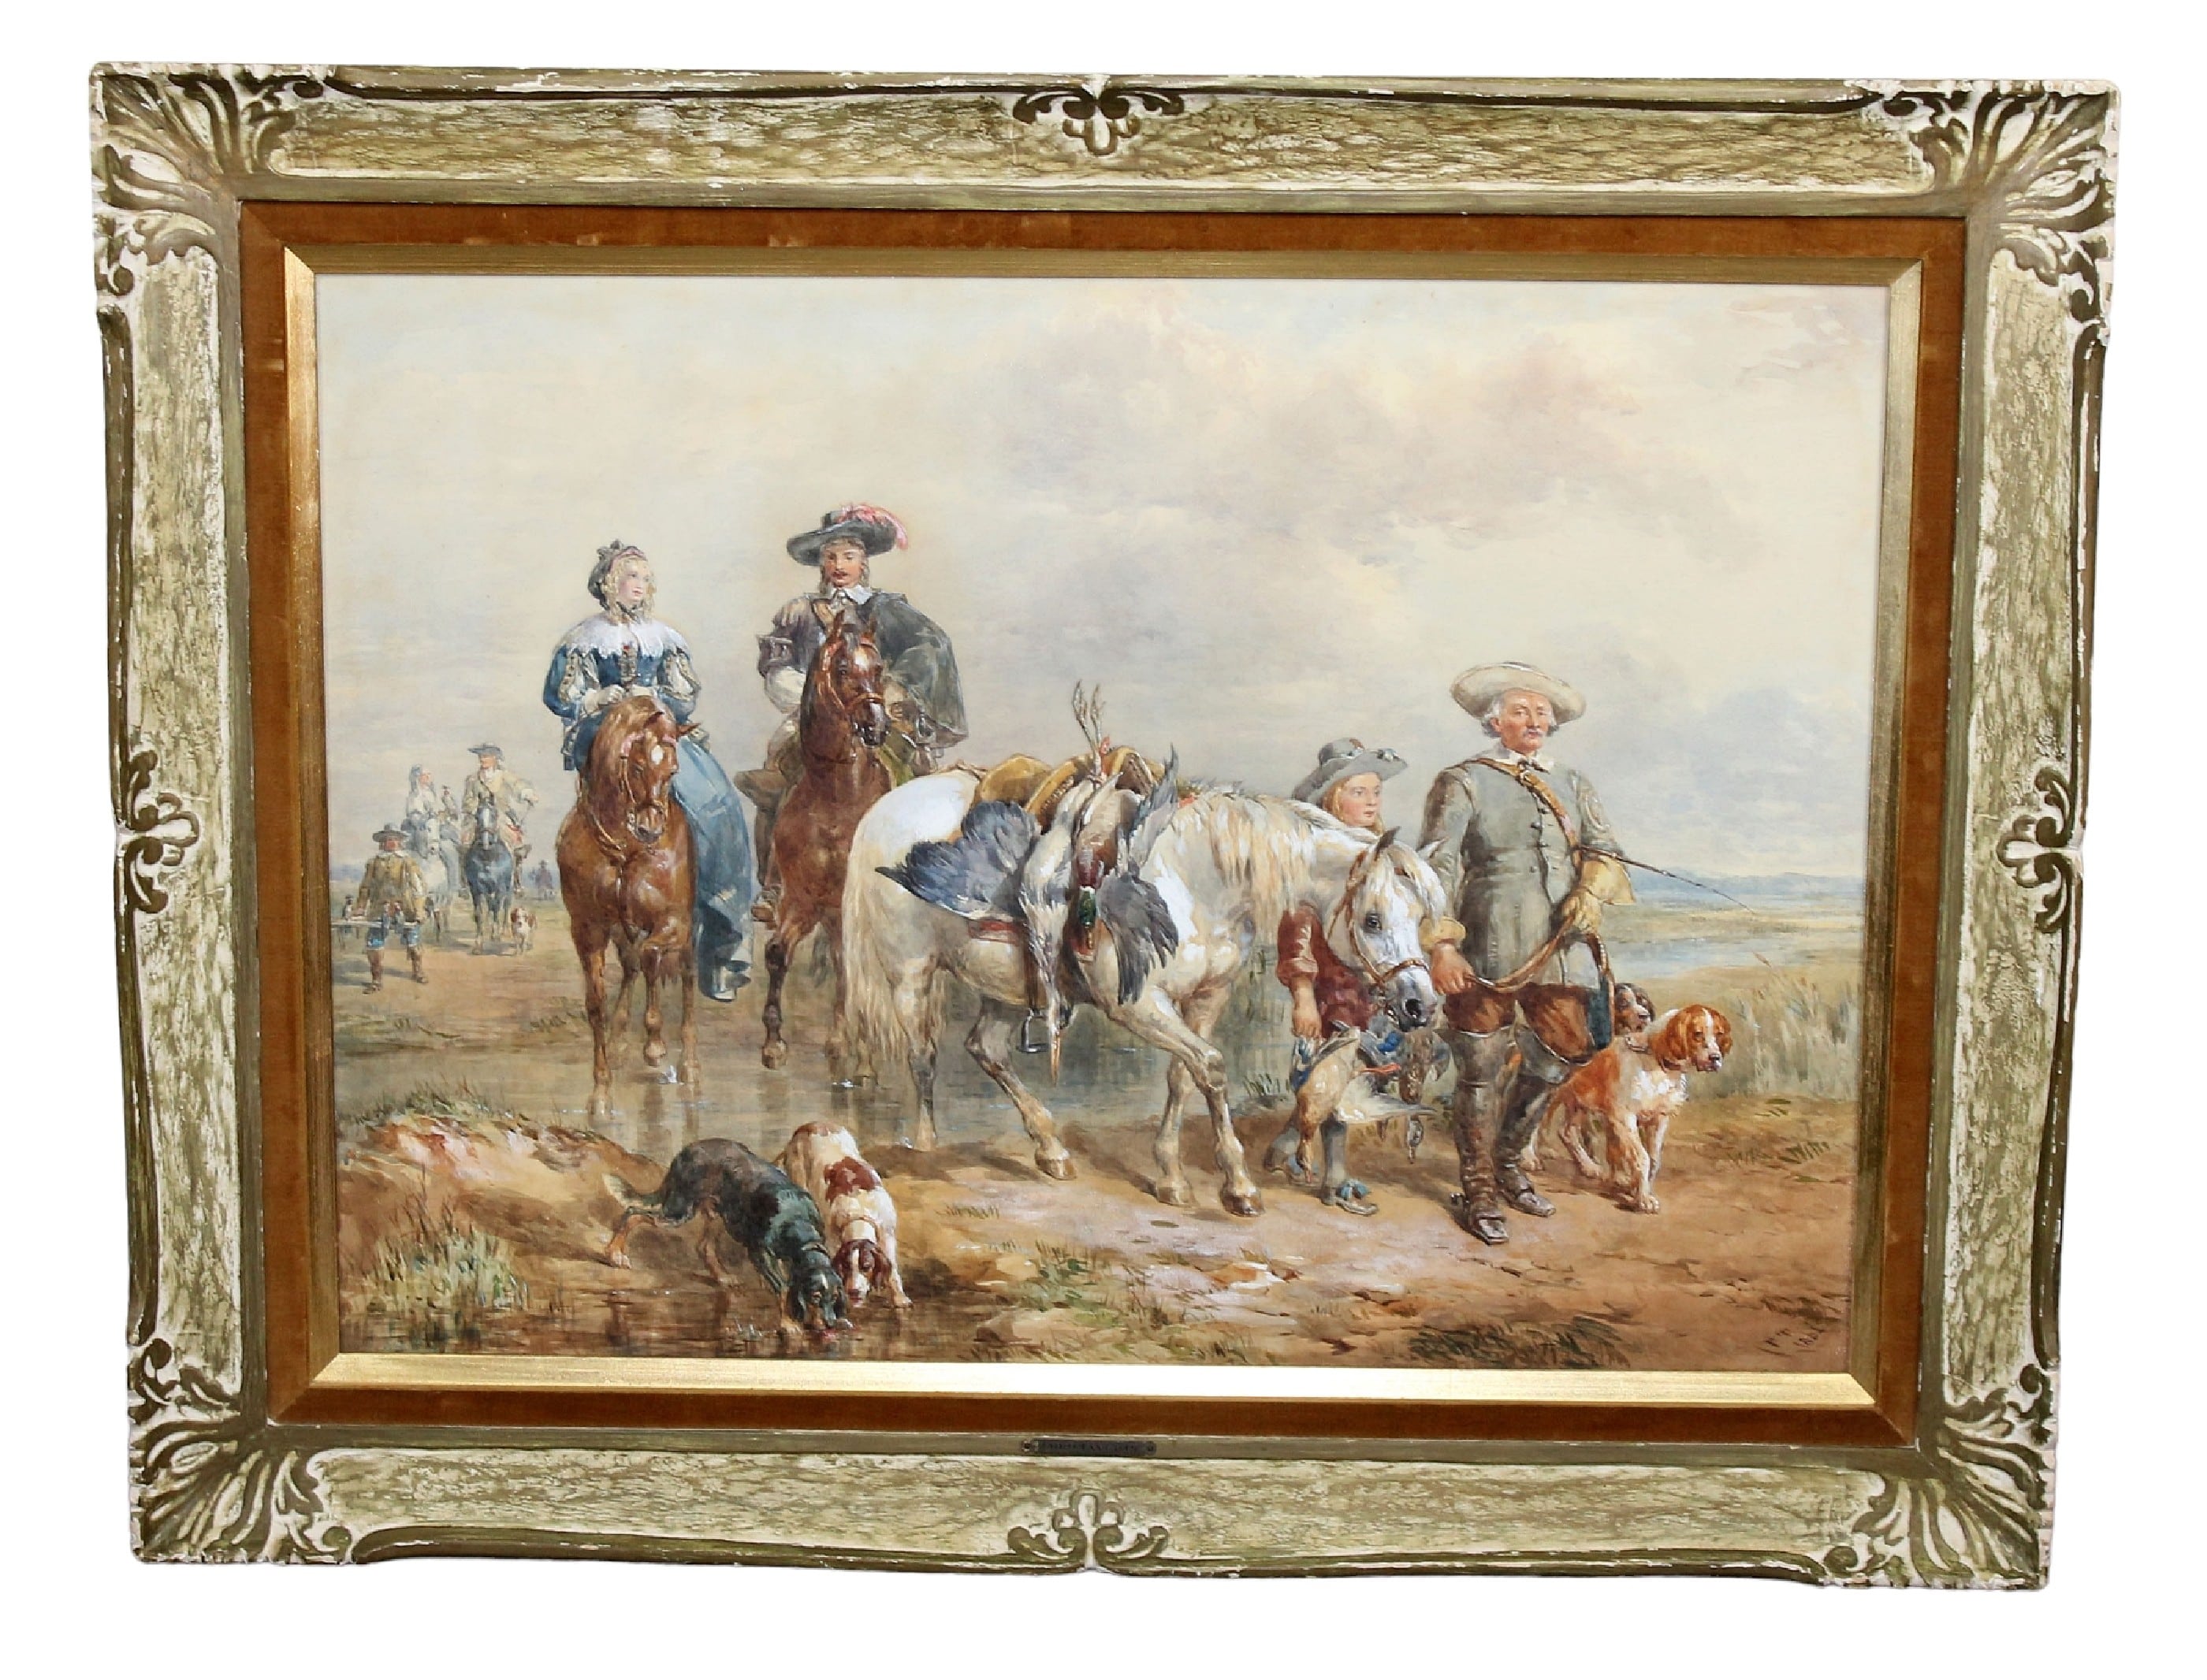 Fredrick Taylor watercolor painting "Return from the Hunt"